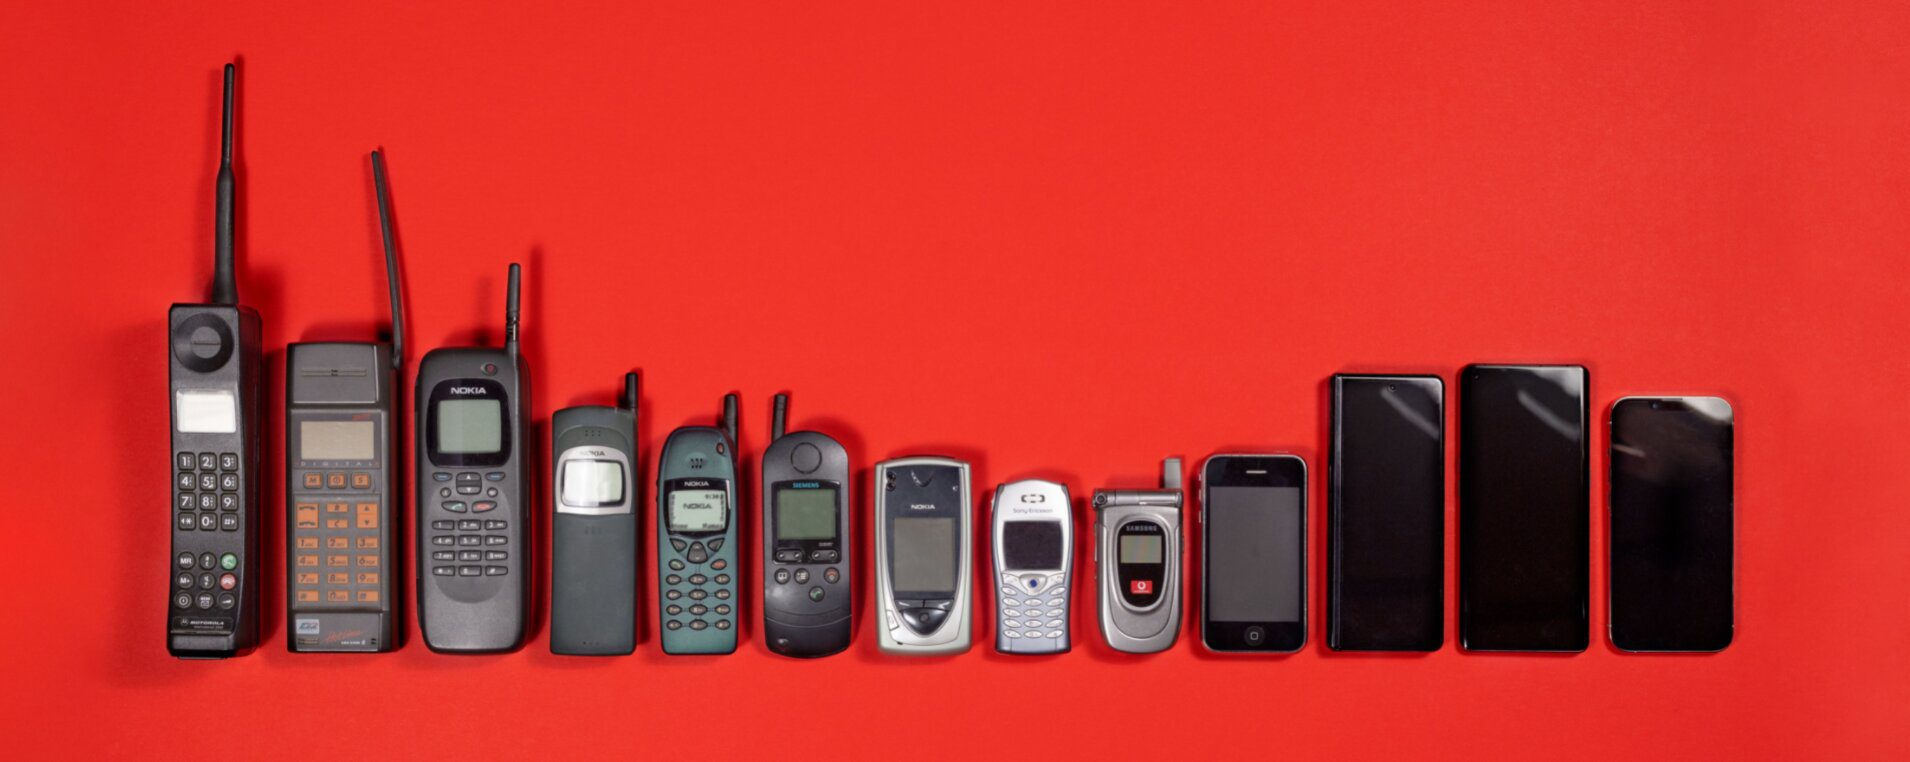 Cell phones over time